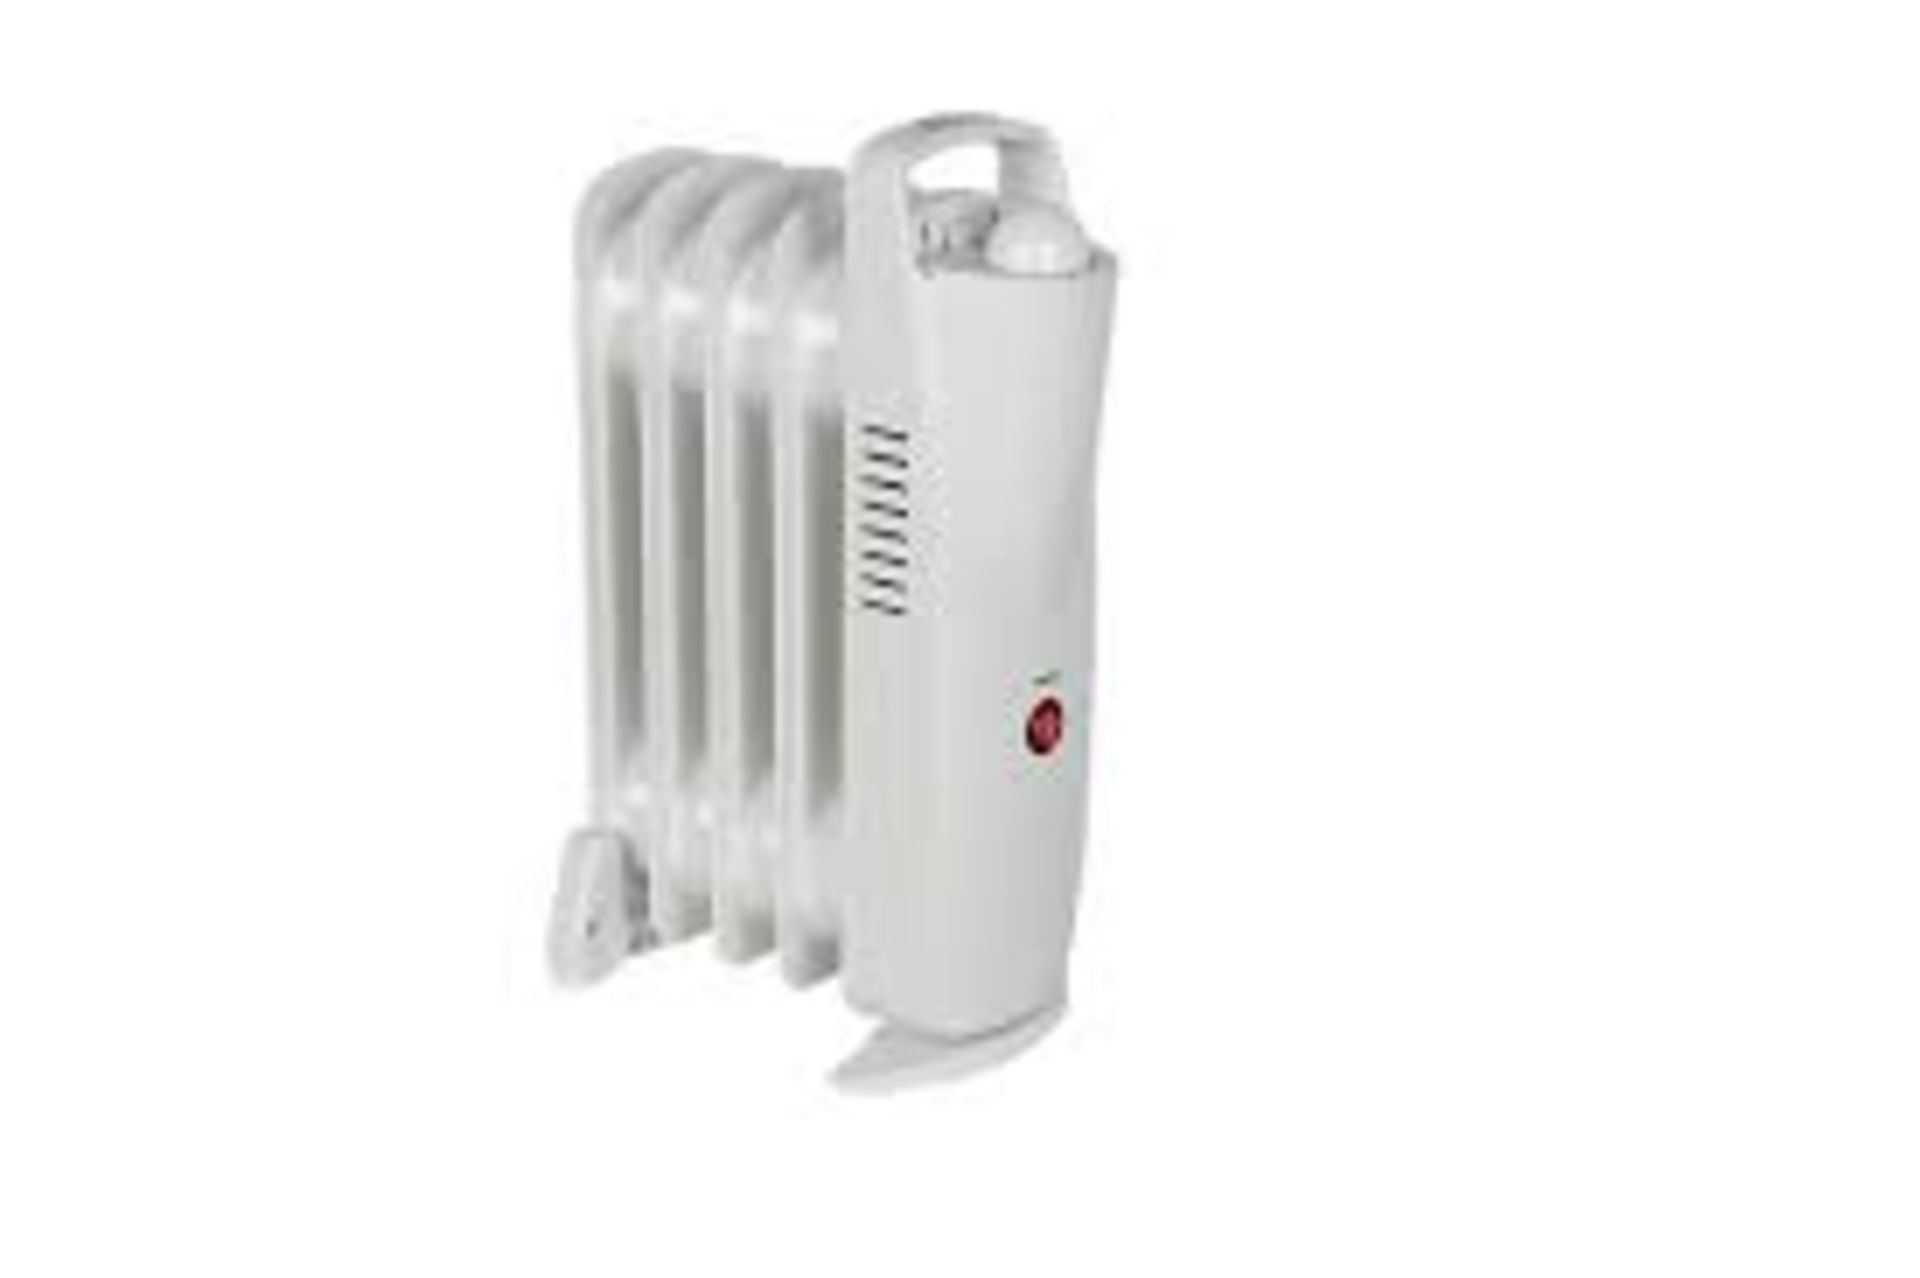 500W White Oil-filled radiator. - ER23. This mini 500w oil filled radiator will evenly heat small